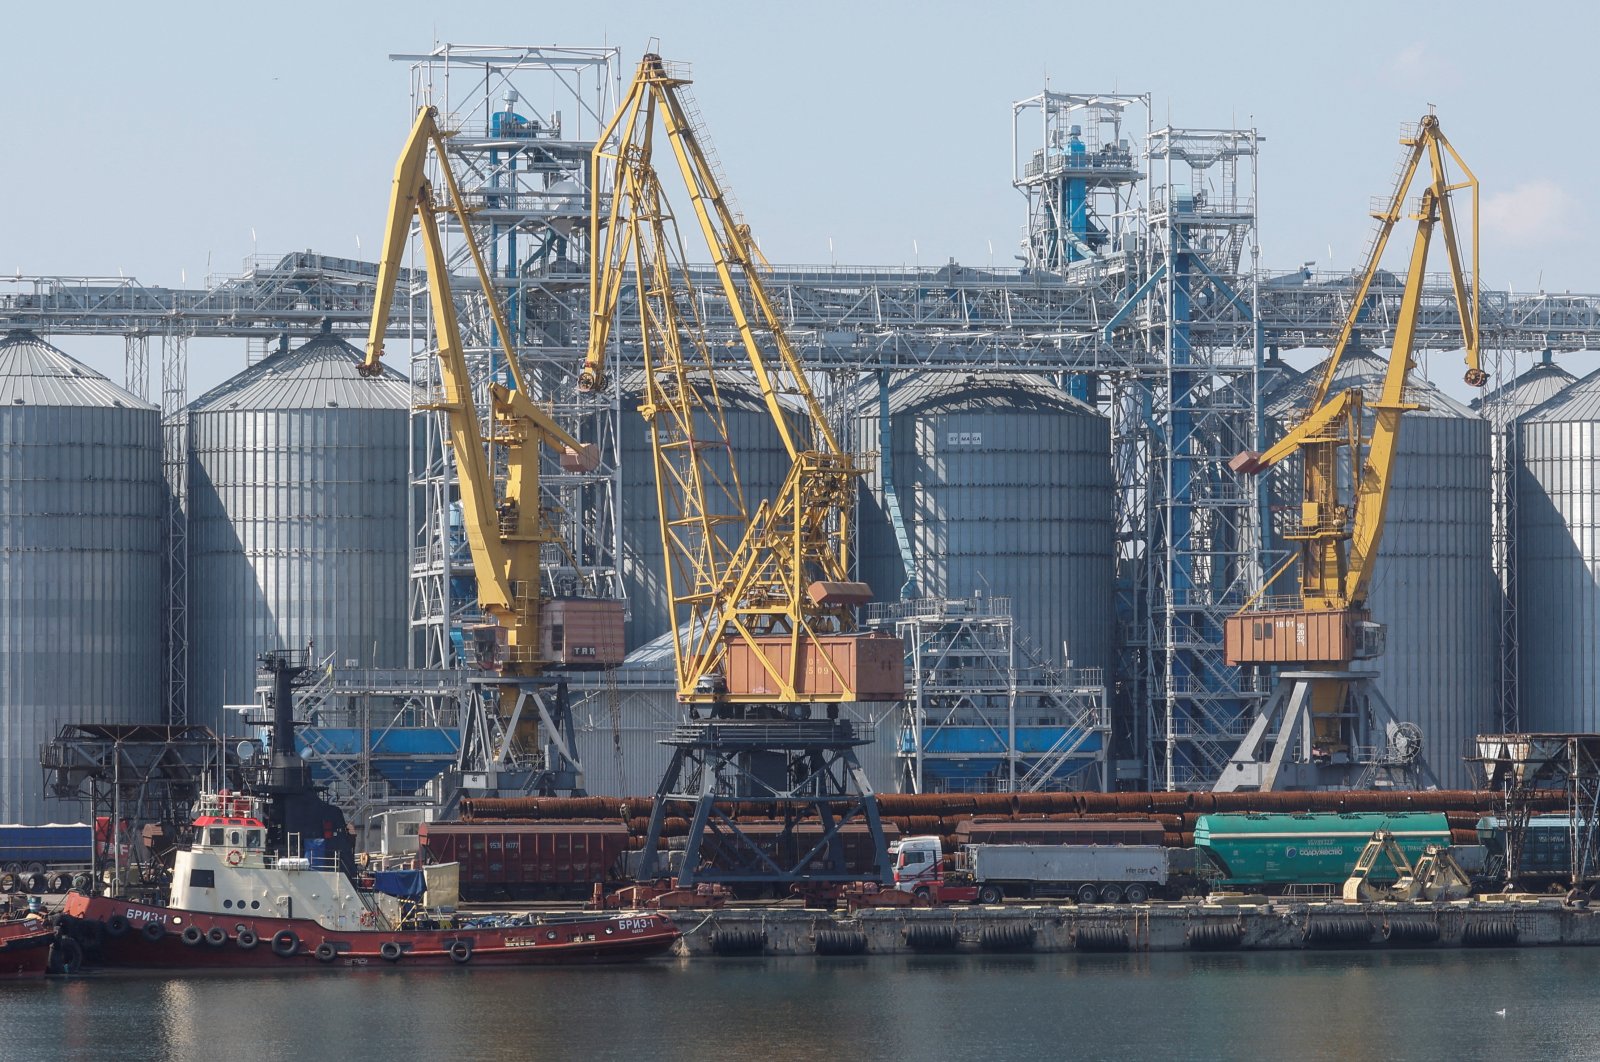 A view shows a grain terminal in the seaport in Odesa after restarting grain exports, Ukraine, Aug. 19, 2022. (Reuters Photo)